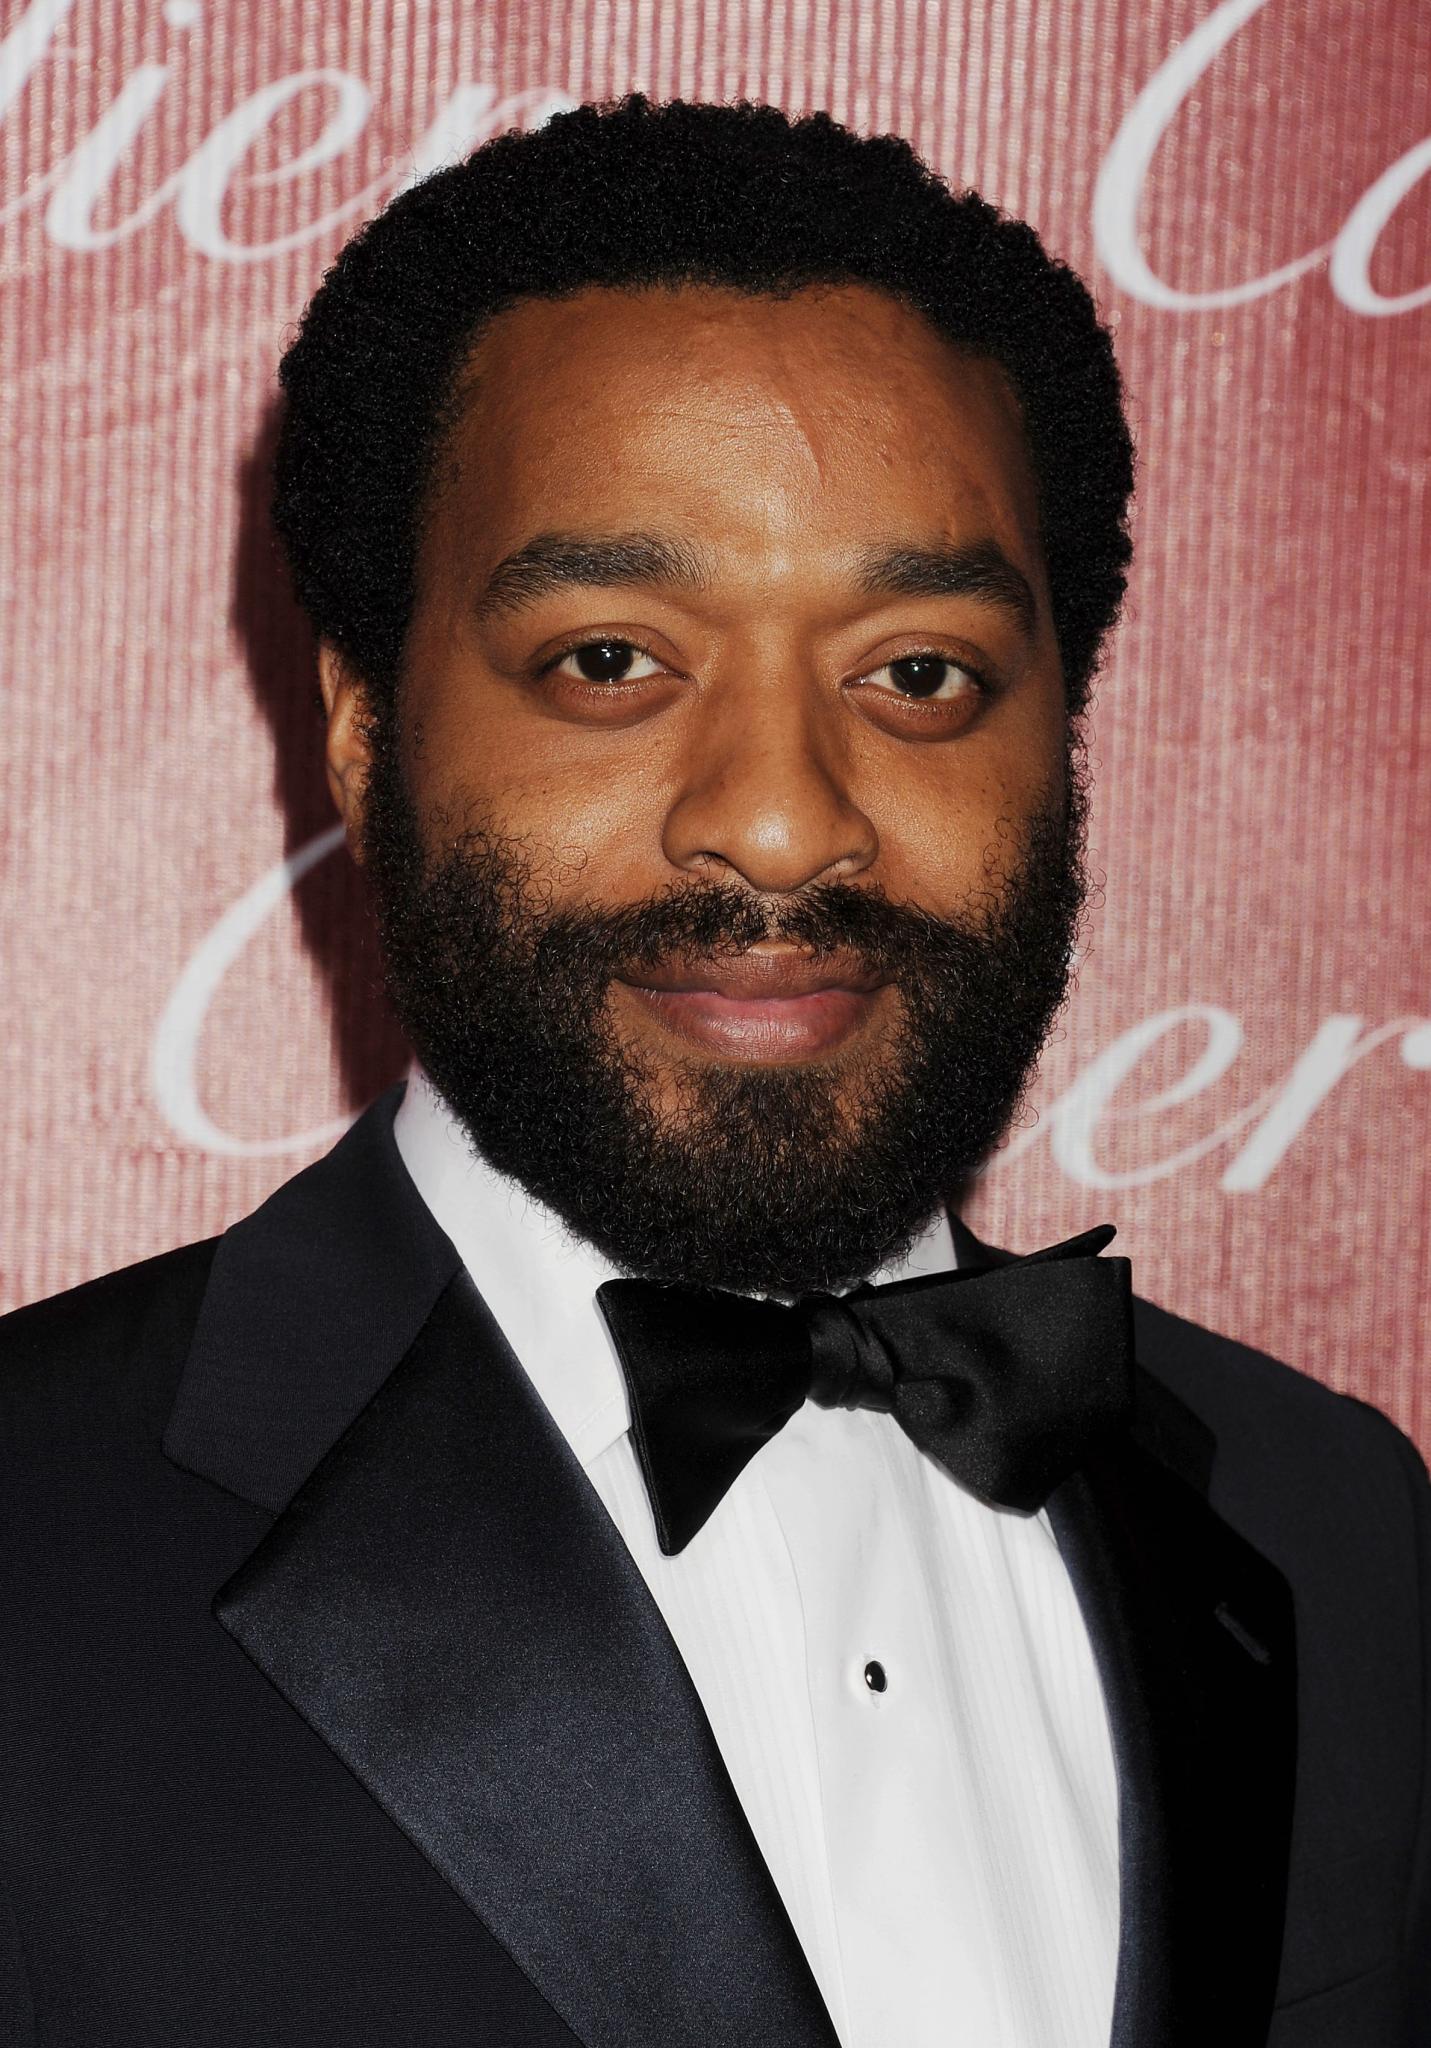 Chiwetel Ejiofor in Talks to Star in James Bond